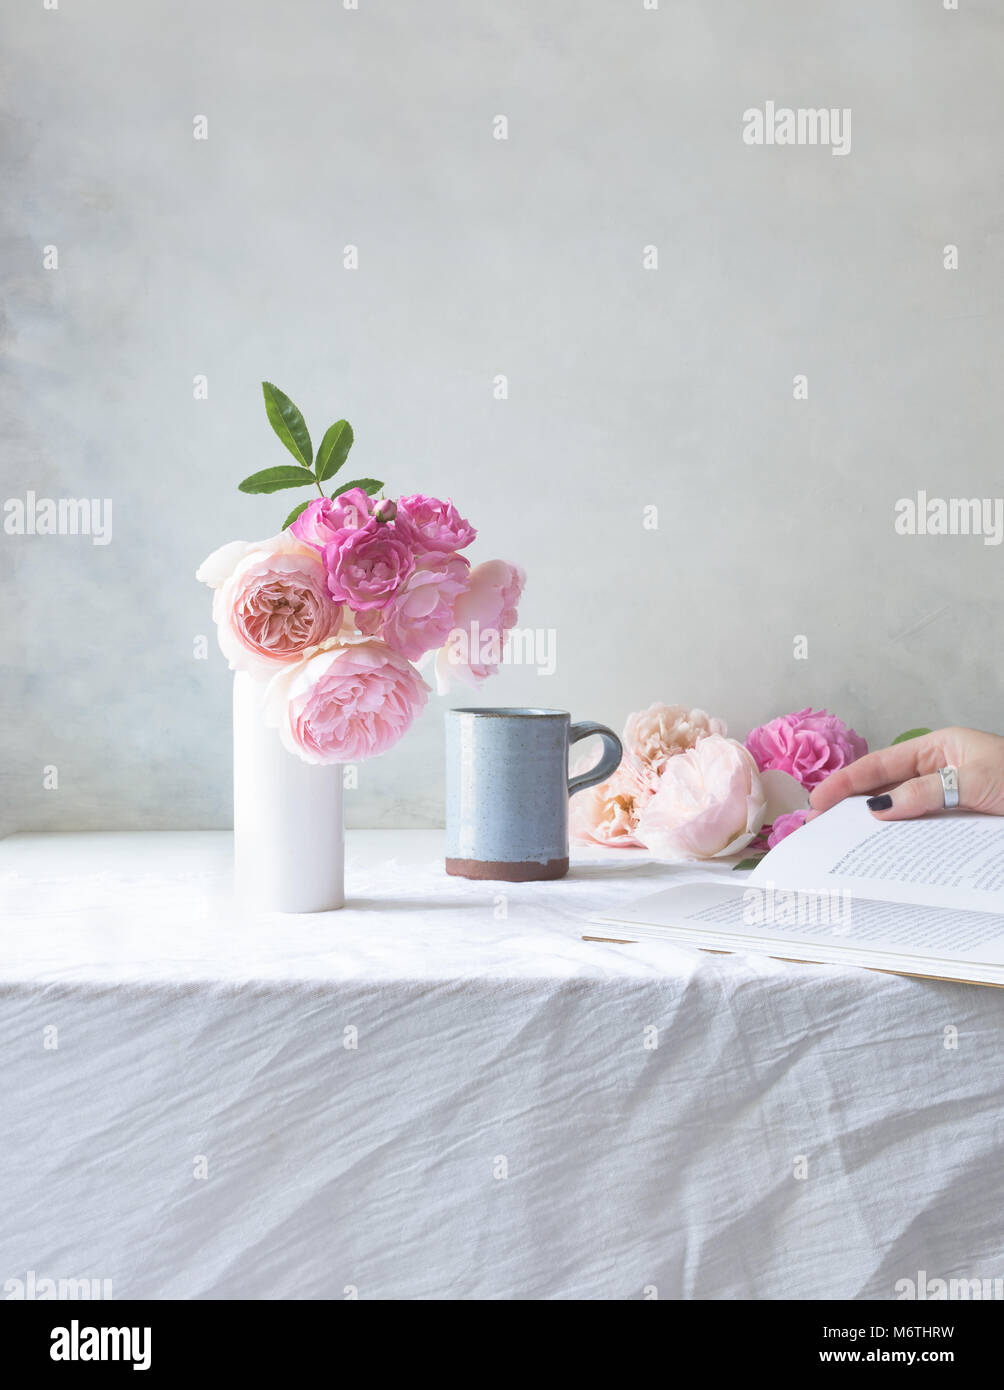 Indoor scene with David Austin pink roses in a white vase on tablle, with mug, and hand in the background holding book Stock Photo